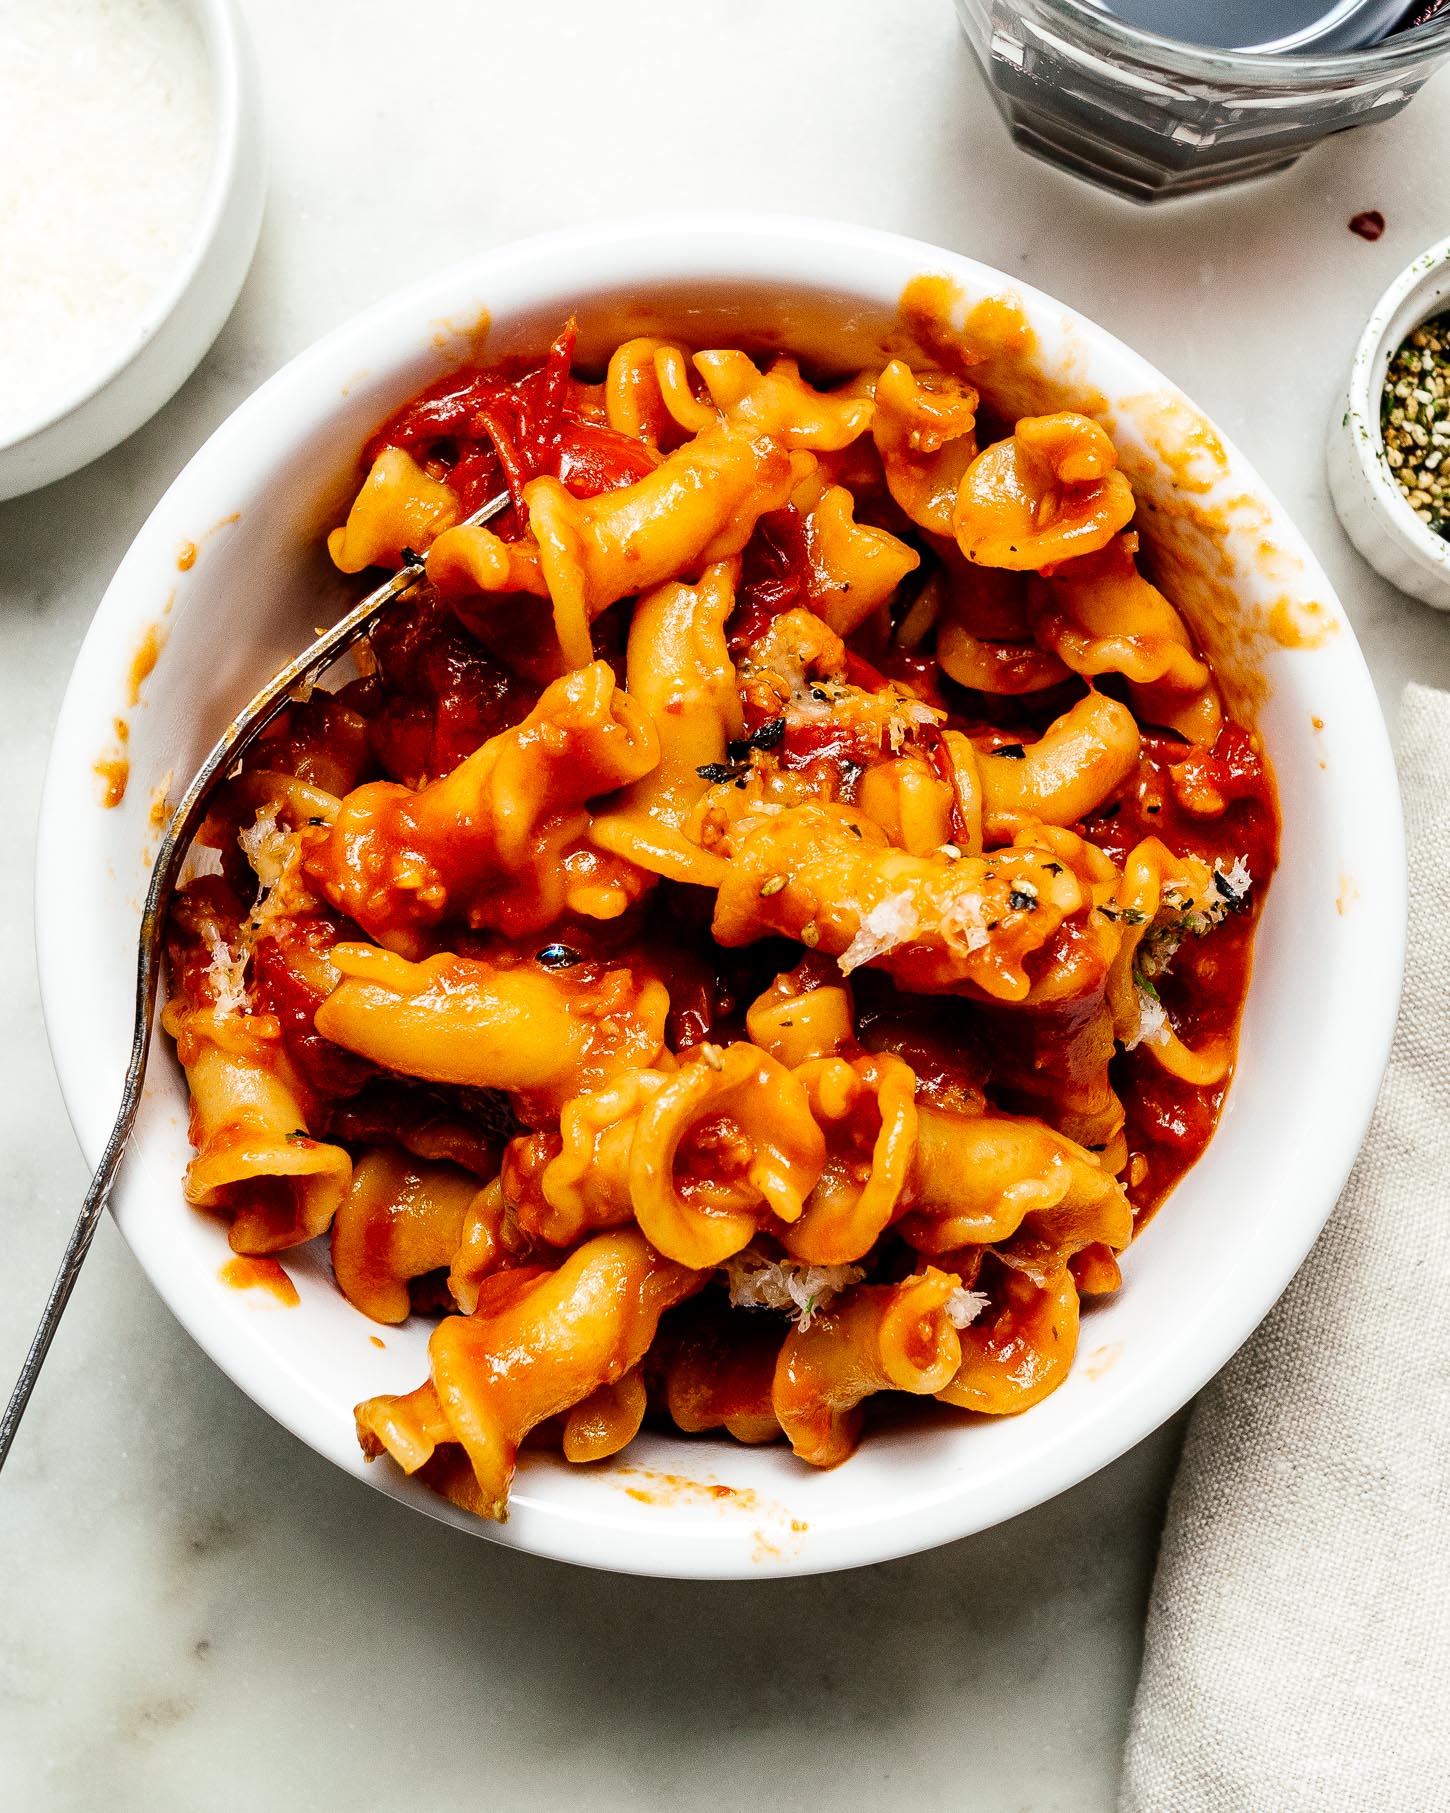 When you’re looking for a quick and comforting tomato-y, garlicky pasta, this ultimate umami bomb tomato sauce will hit all the right notes. #tomatosauce #umami #pasta #pastasauce #dinner #recipes #recipe 